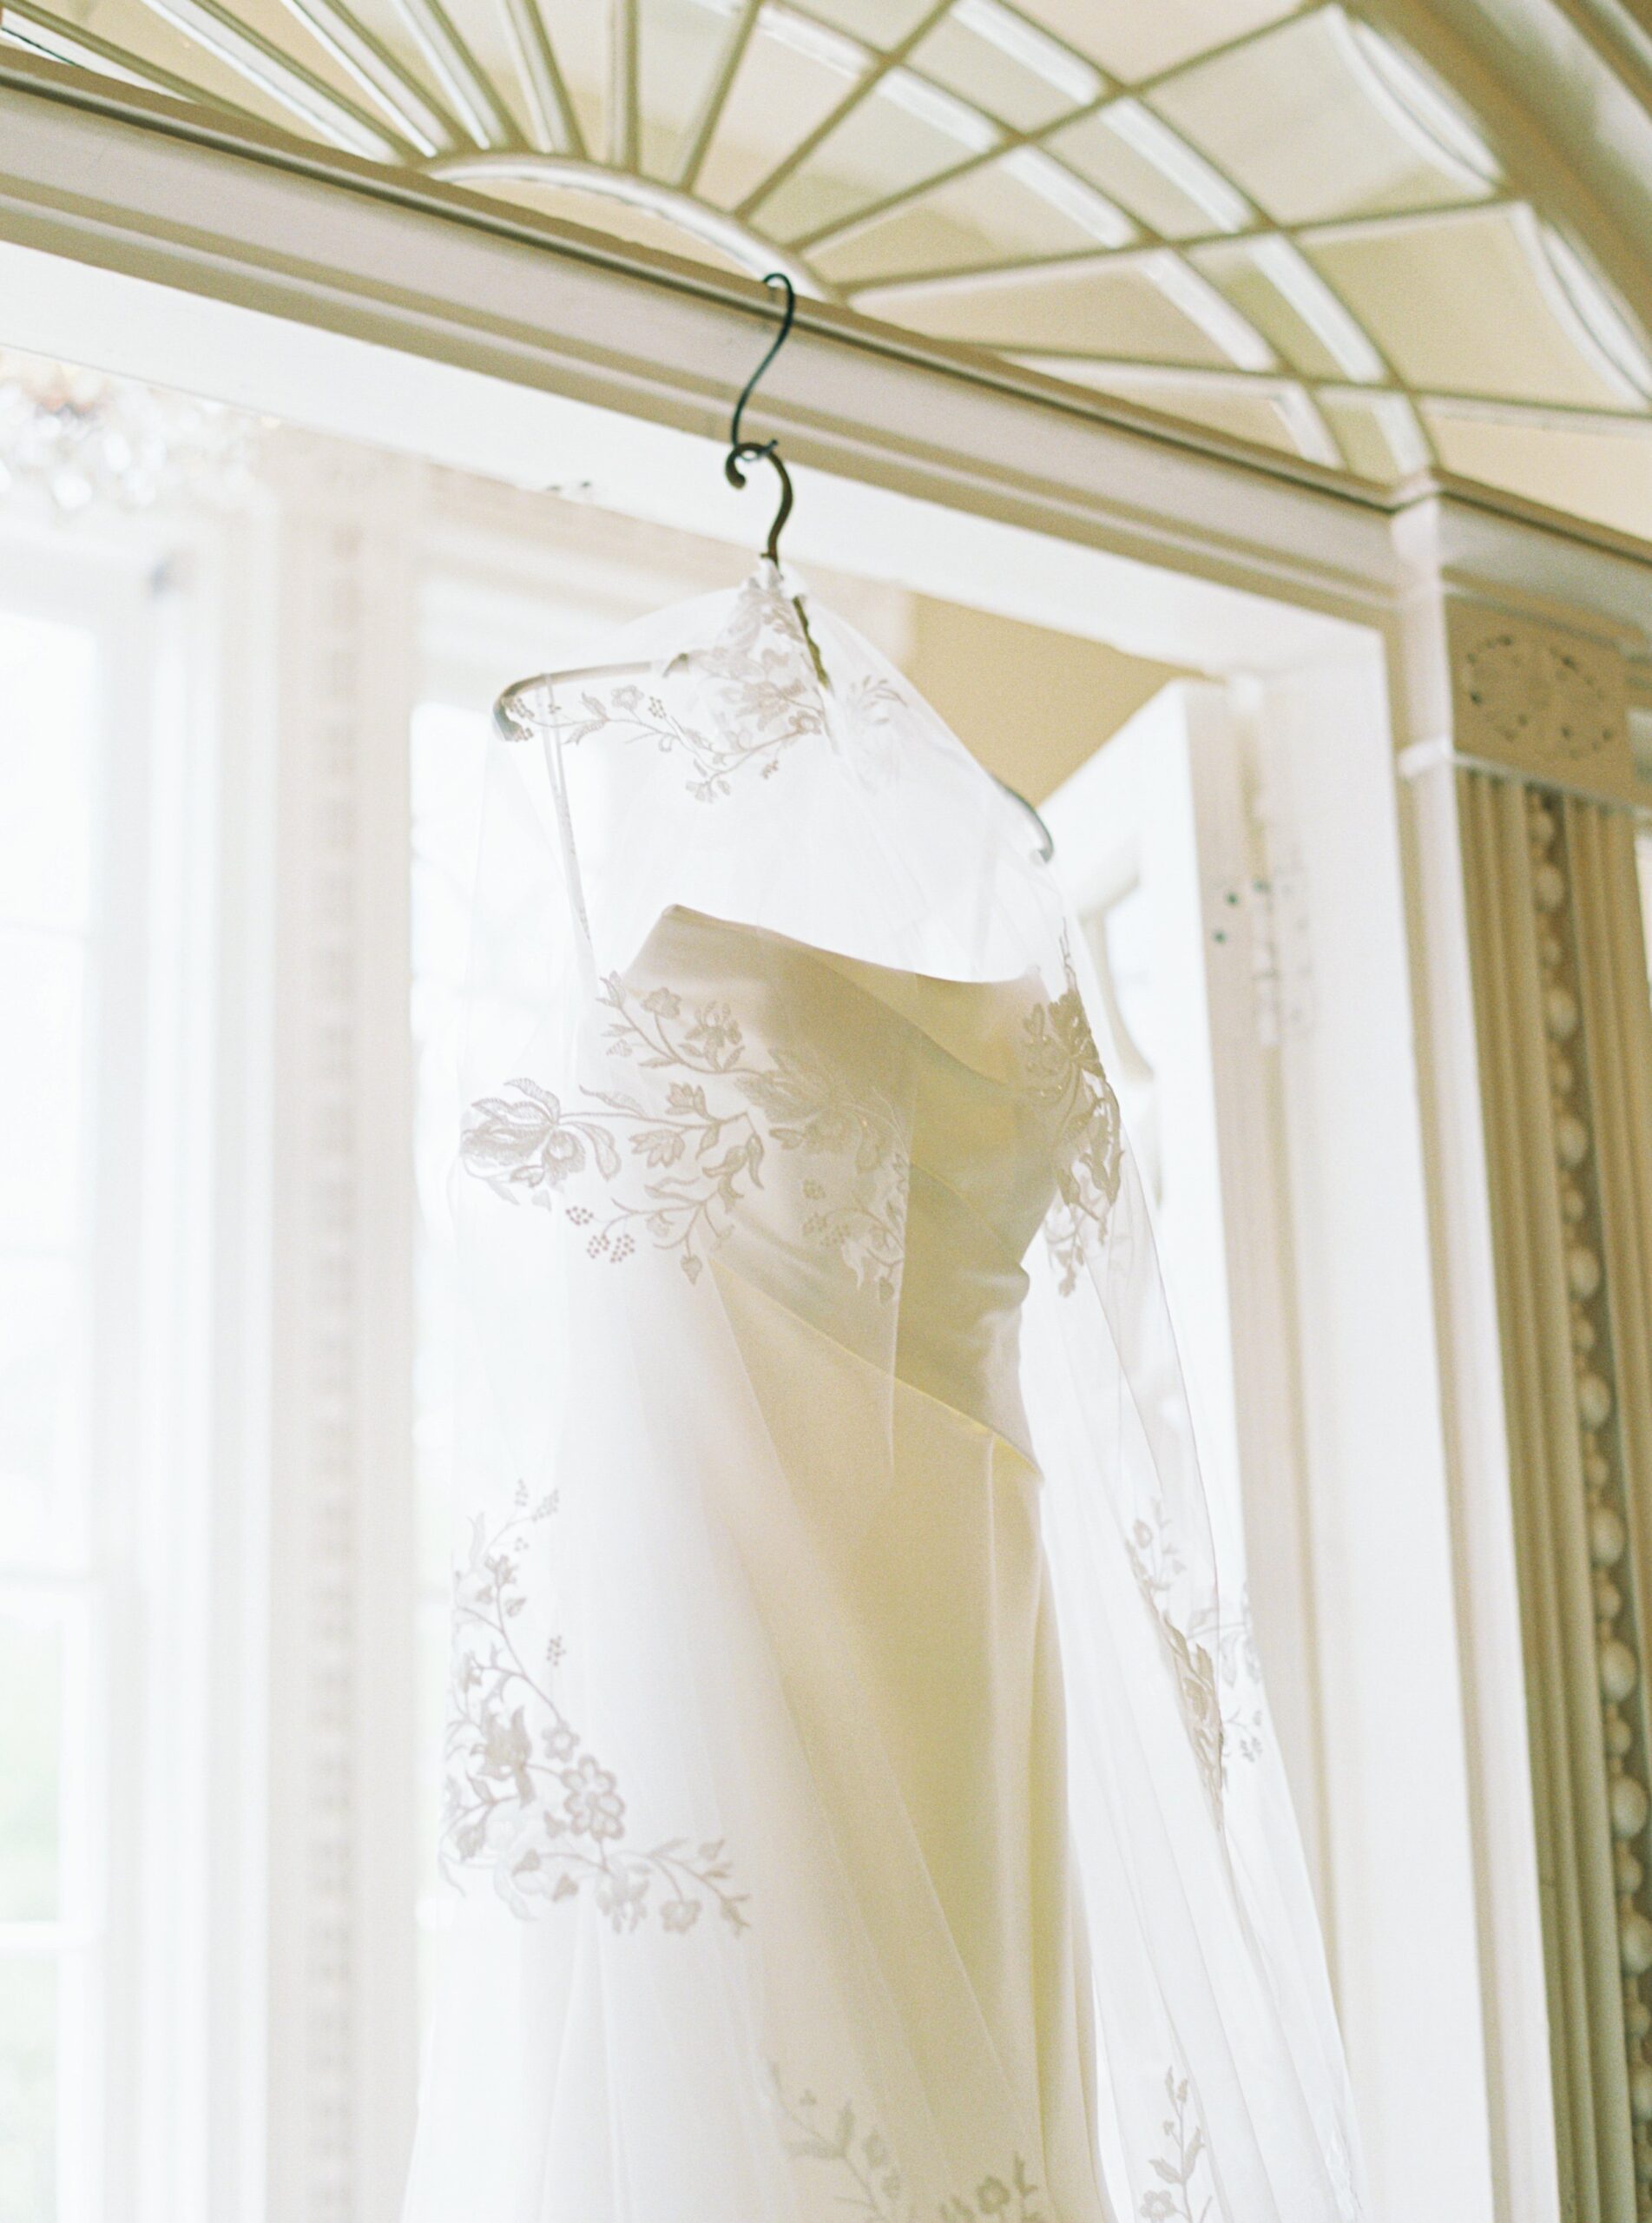 hanging wedding dress and veil with floral details.